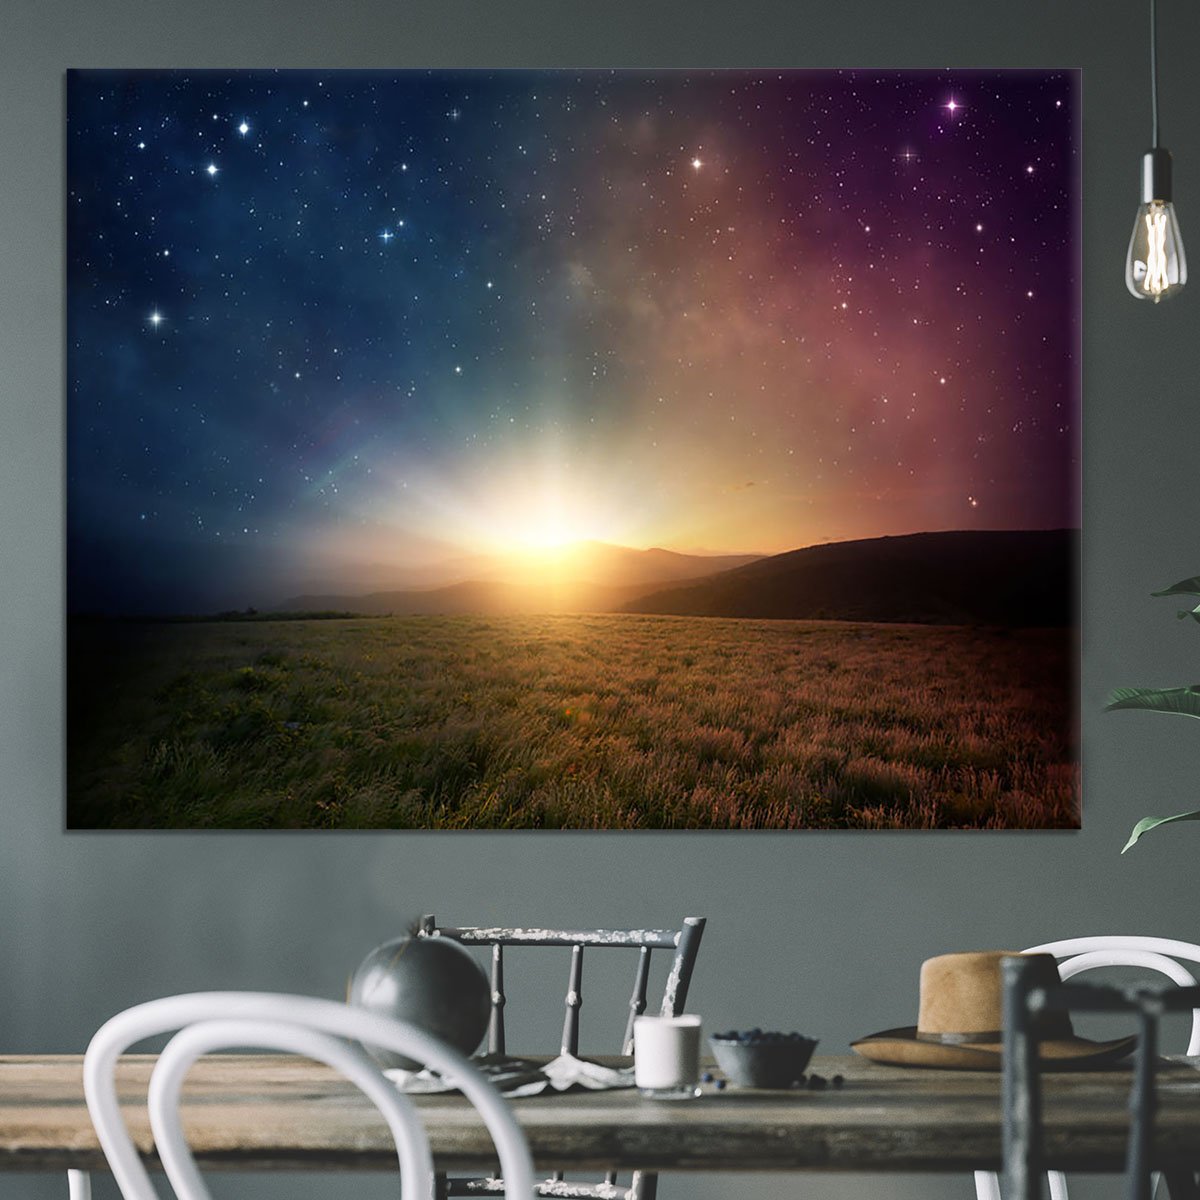 Sunrise with stars and galaxy in night Canvas Print or Poster